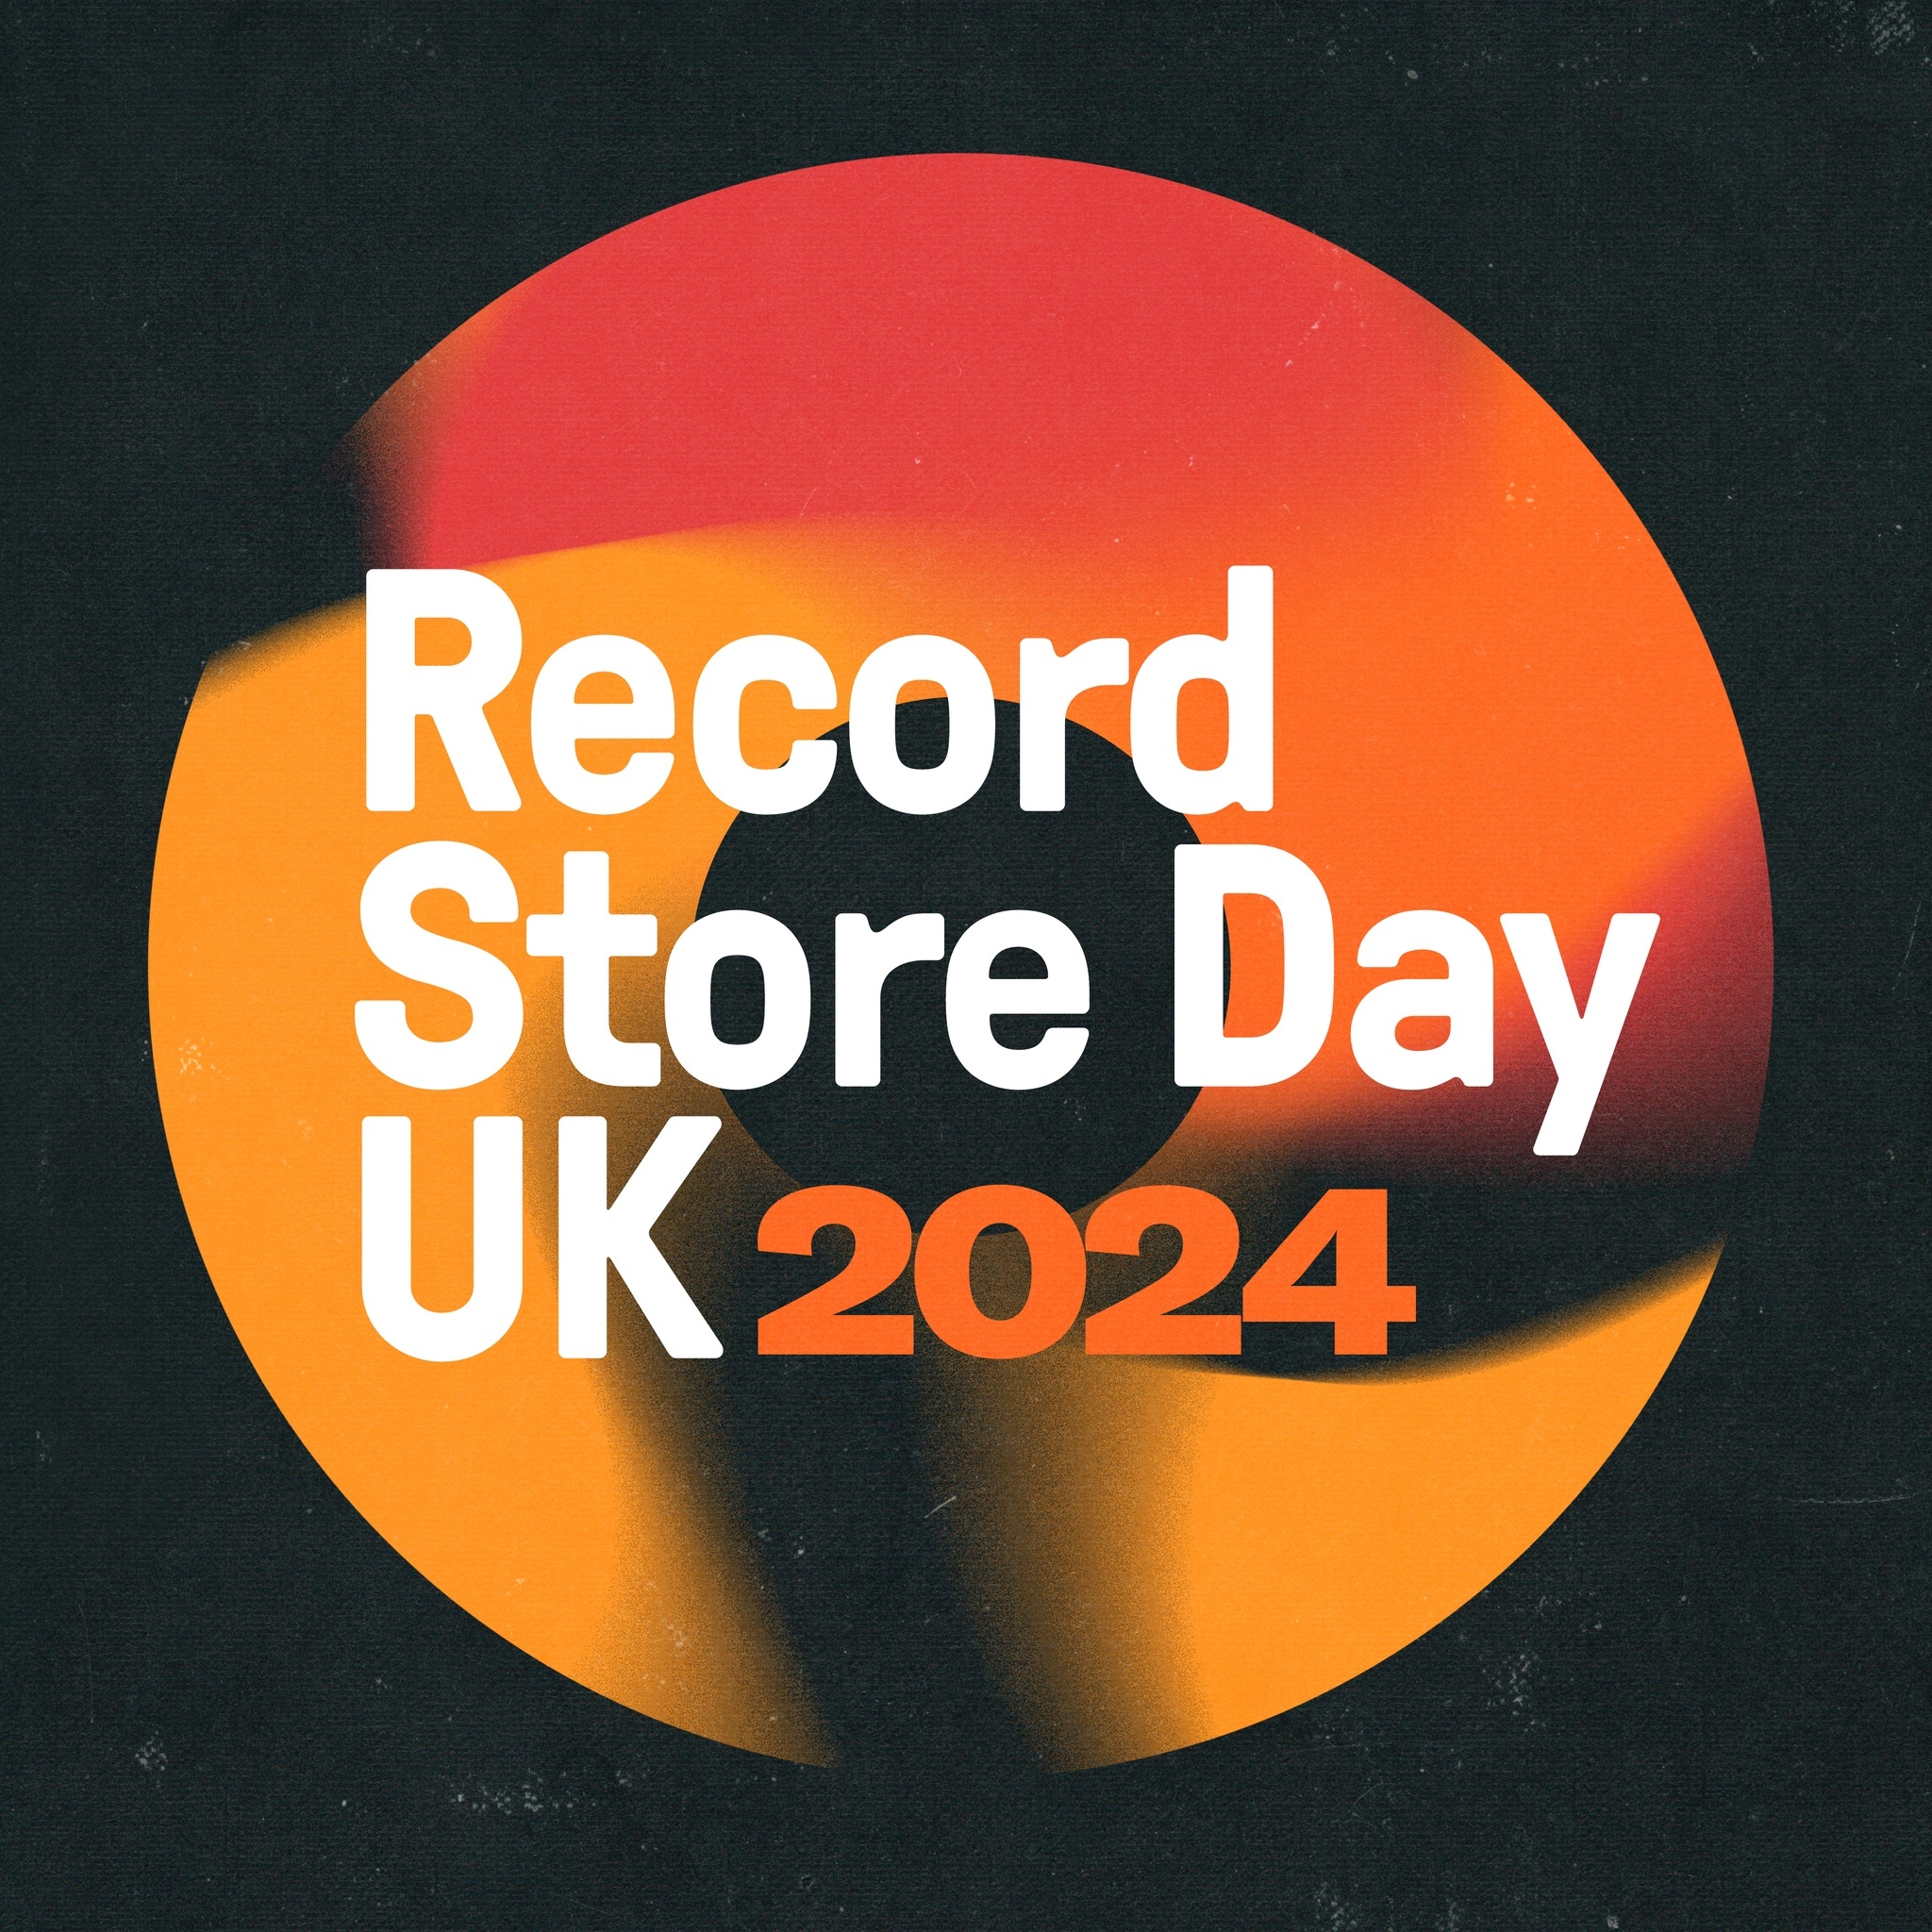 1. Record Store Day 2024